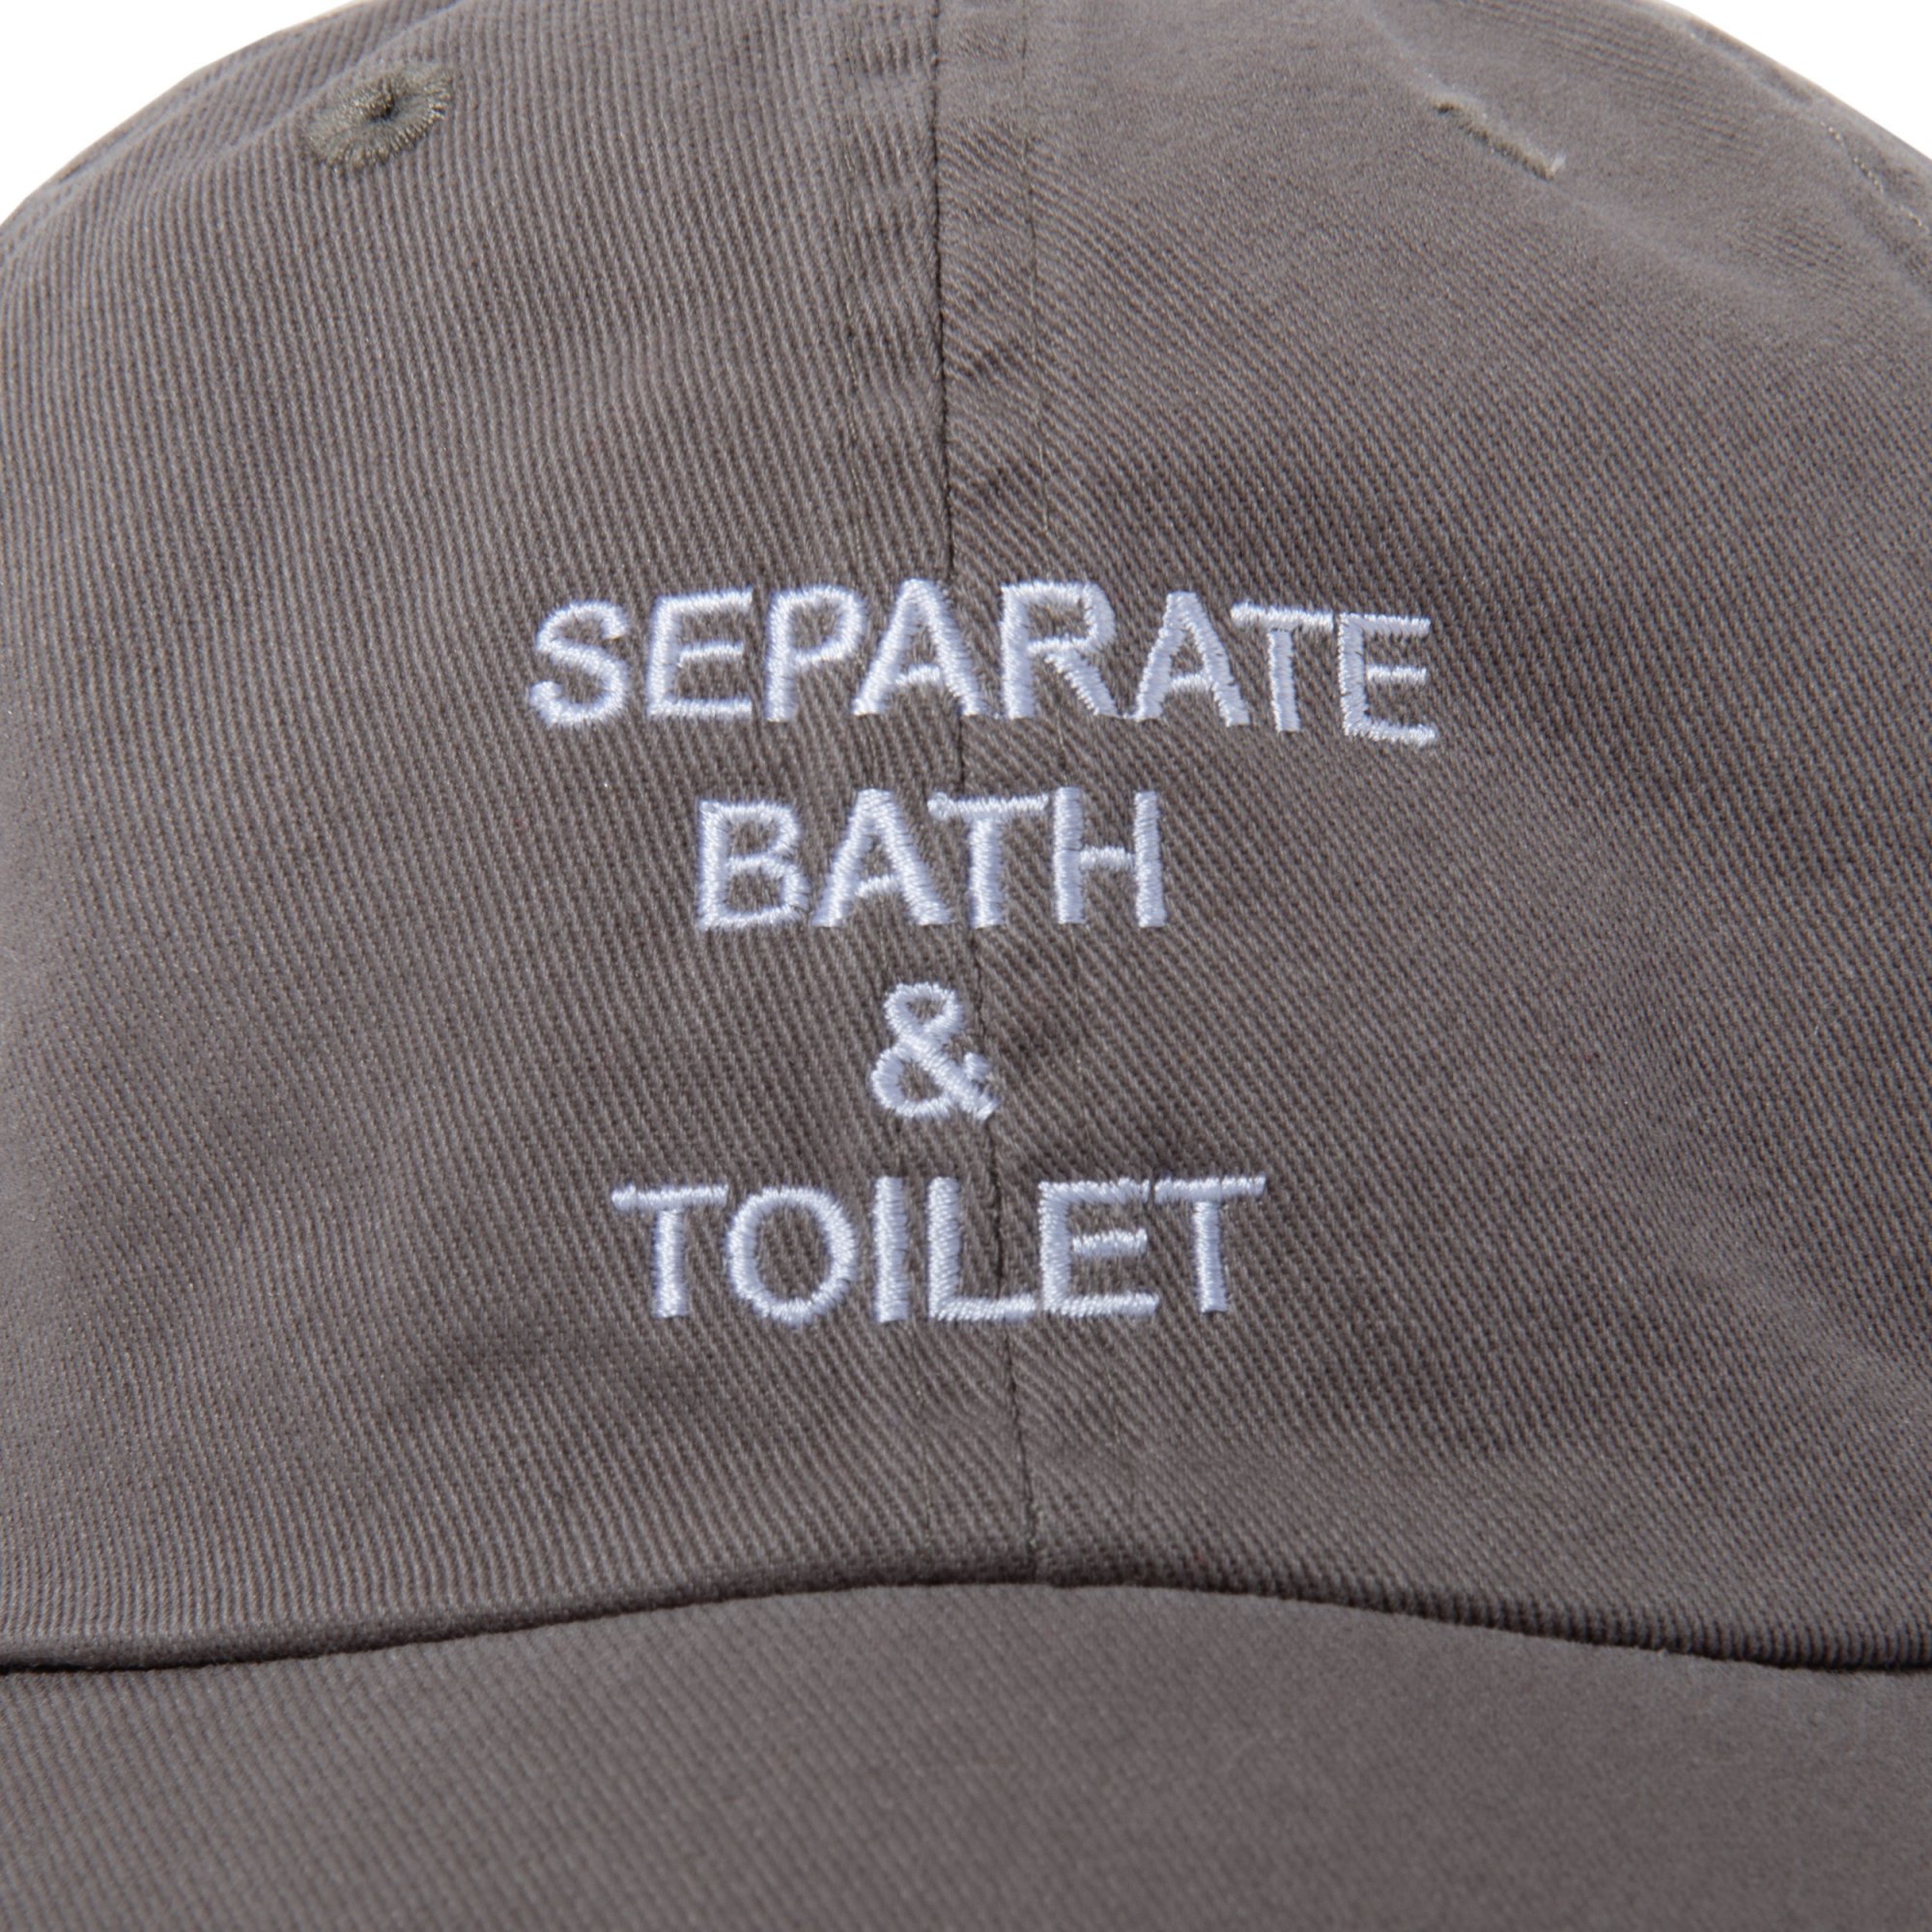 SEPARATE BATH & TOILET<br />6PANNEL CAP2 / GRAY<img class='new_mark_img2' src='https://img.shop-pro.jp/img/new/icons47.gif' style='border:none;display:inline;margin:0px;padding:0px;width:auto;' />